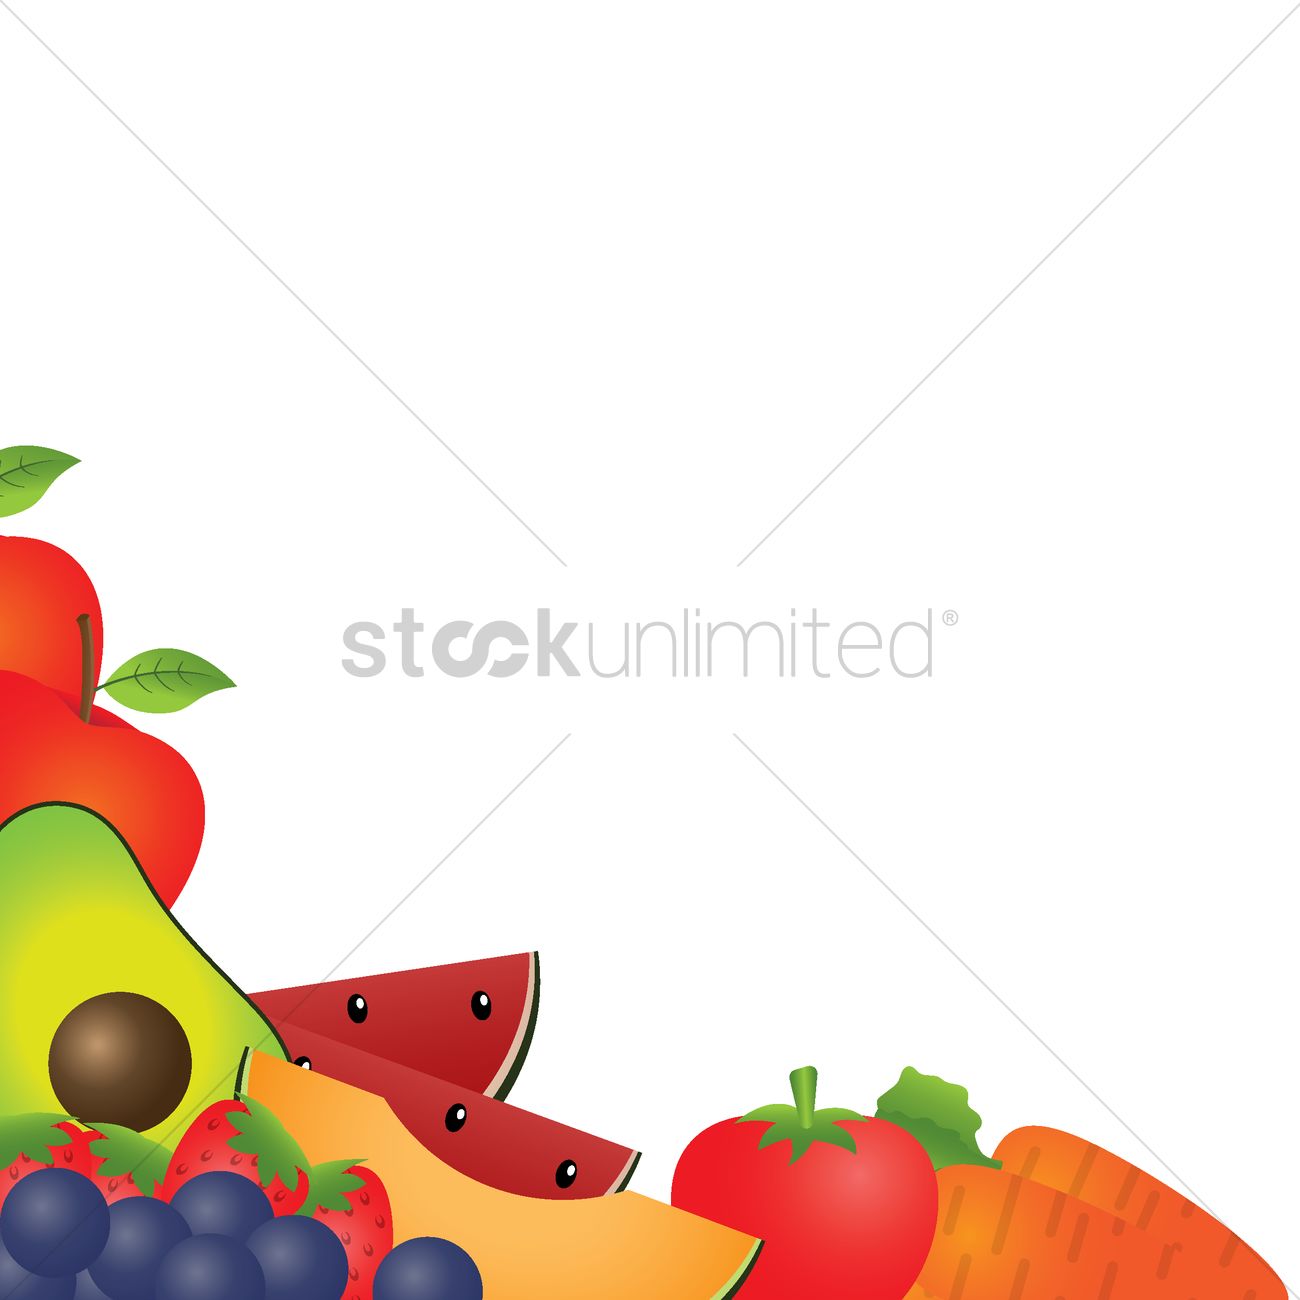 Fruits and vegetable.